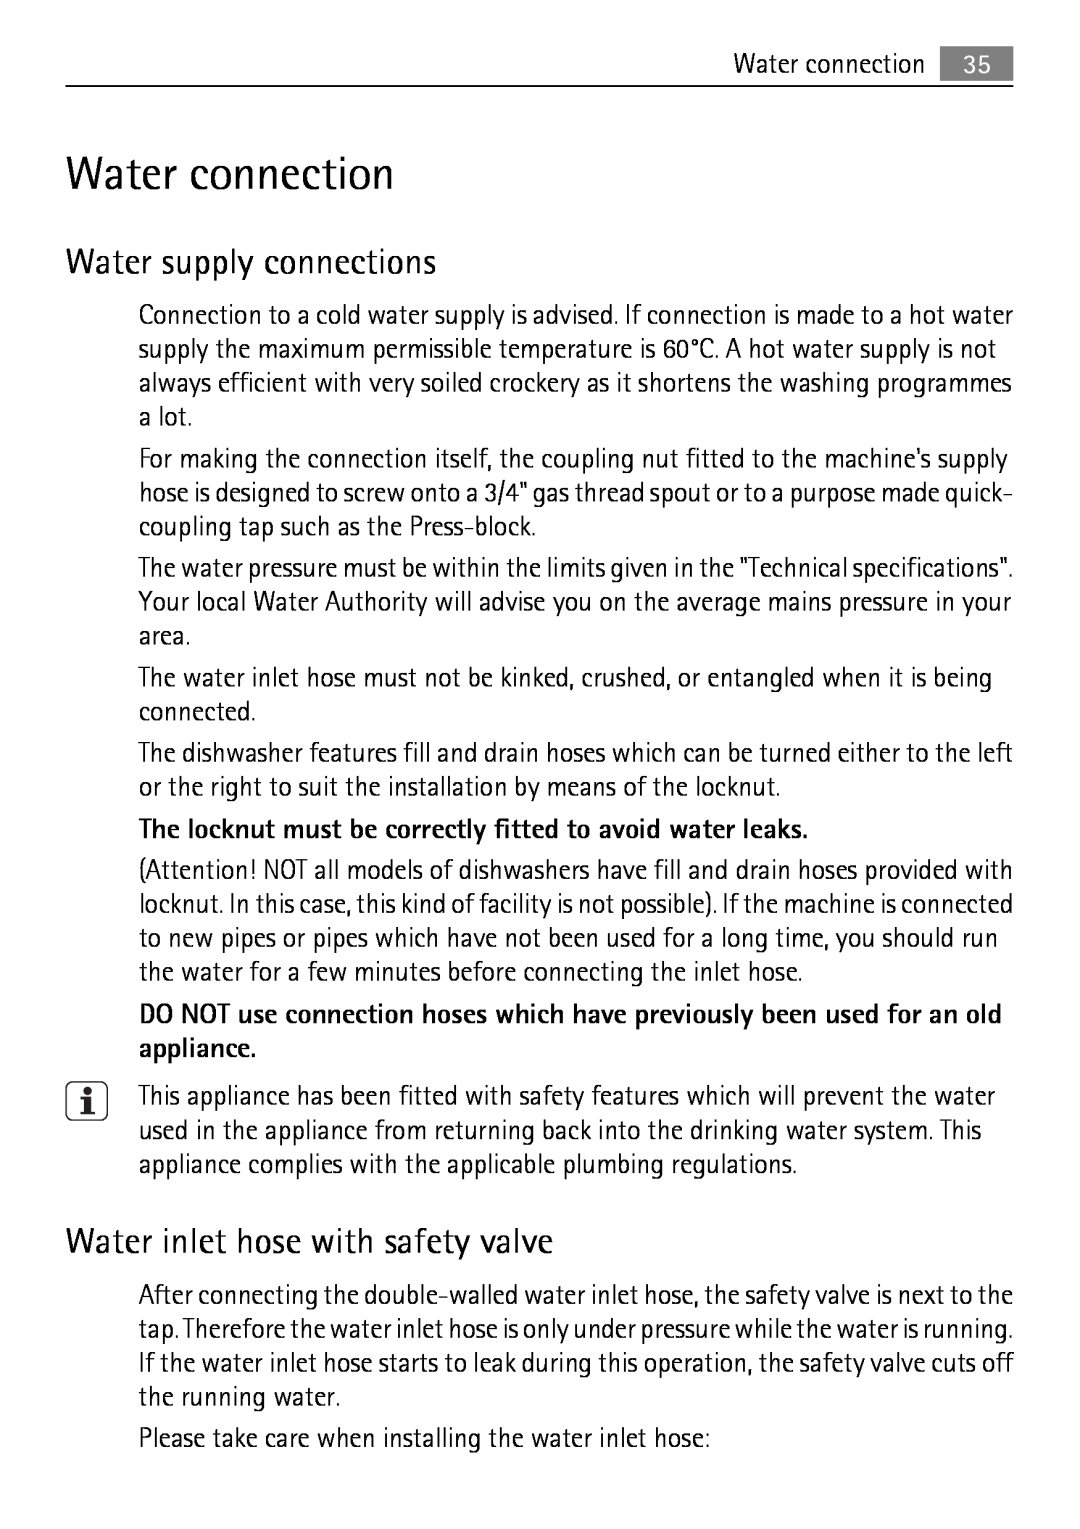 Electrolux 65011 VI user manual Water connection, Water supply connections, Water inlet hose with safety valve 